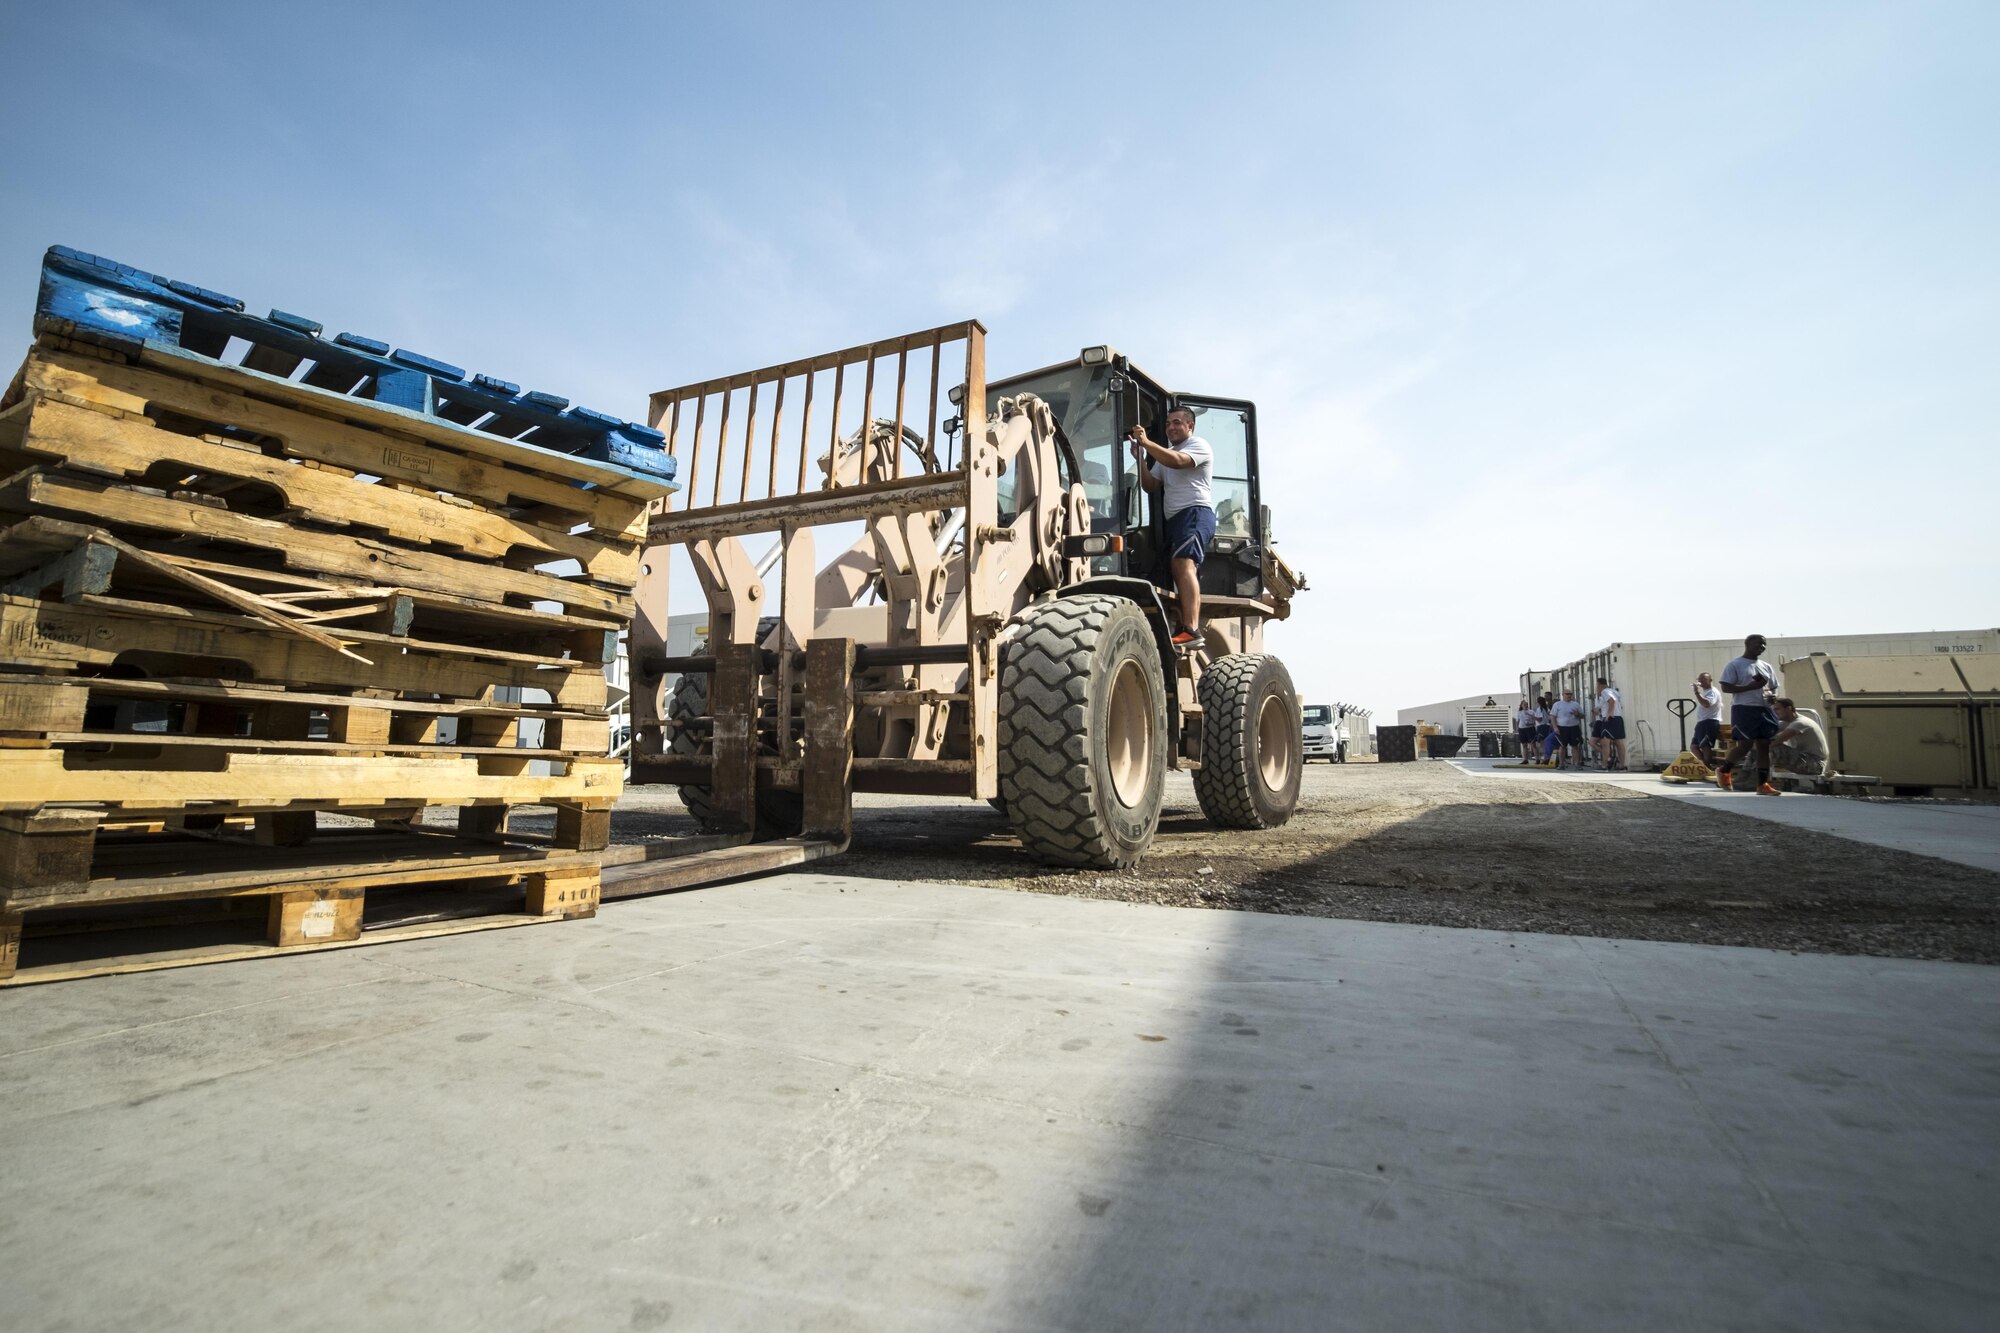 Brig. Gen. Derek C. France, 380th Air Expeditionary Wing commander, moves empty pallets under the guidance of Airman 1st Class Cristian Narino Garcia, 380th Expeditionary Force Support Squadron services journeyman, Aug. 31, 2017, at Al Dhafra Air Base, United Arab Emirates.